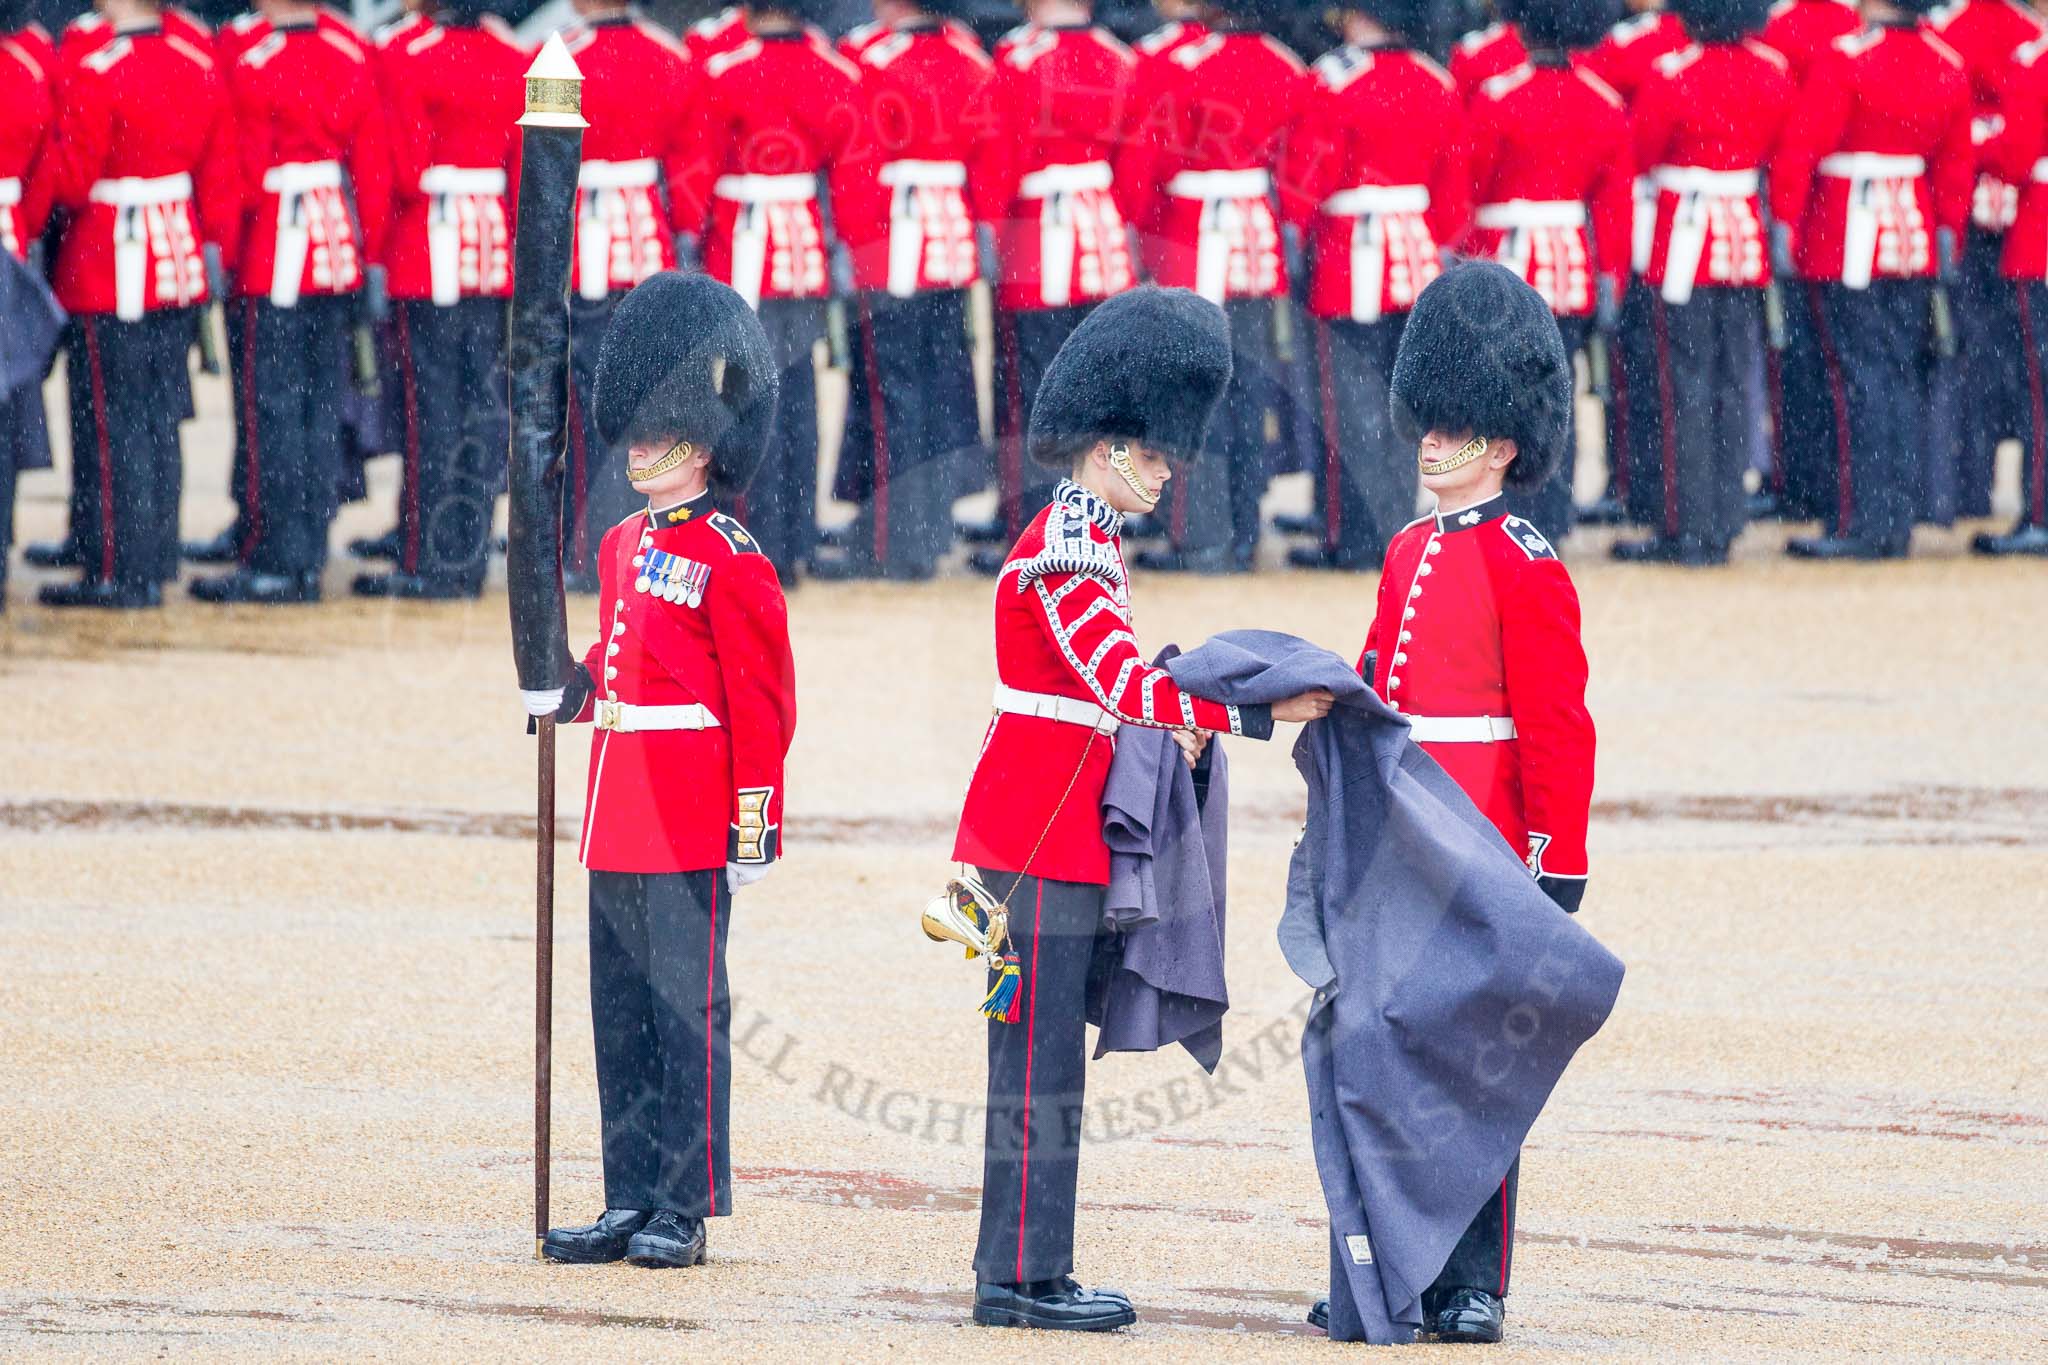 The Colonel's Review 2014.
Horse Guards Parade, Westminster,
London,

United Kingdom,
on 07 June 2014 at 10:26, image #120